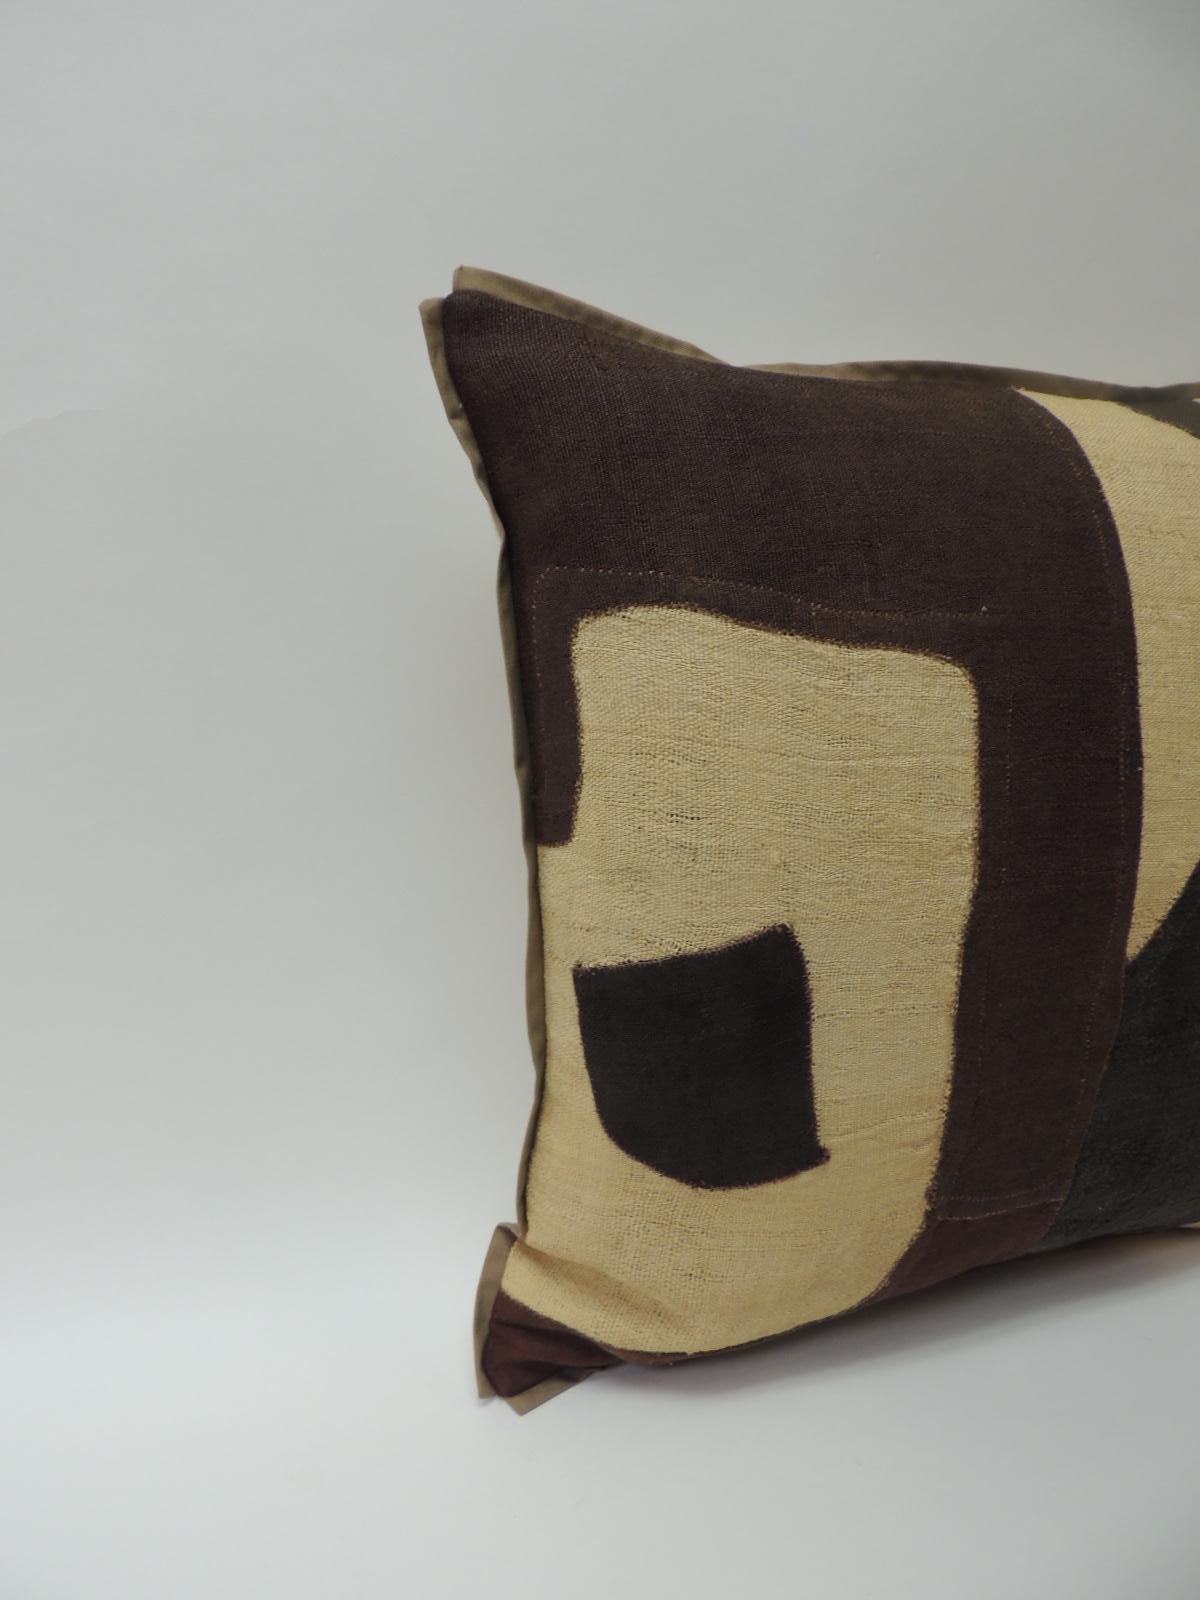 Applique raffia, patchwork and applique brown, black and natural decorative pillow with
custom flat cotton trim in earth-tone khaki color all around. Natural cotton and linen backing. Pillow handcrafted and designed in the USA with custom made